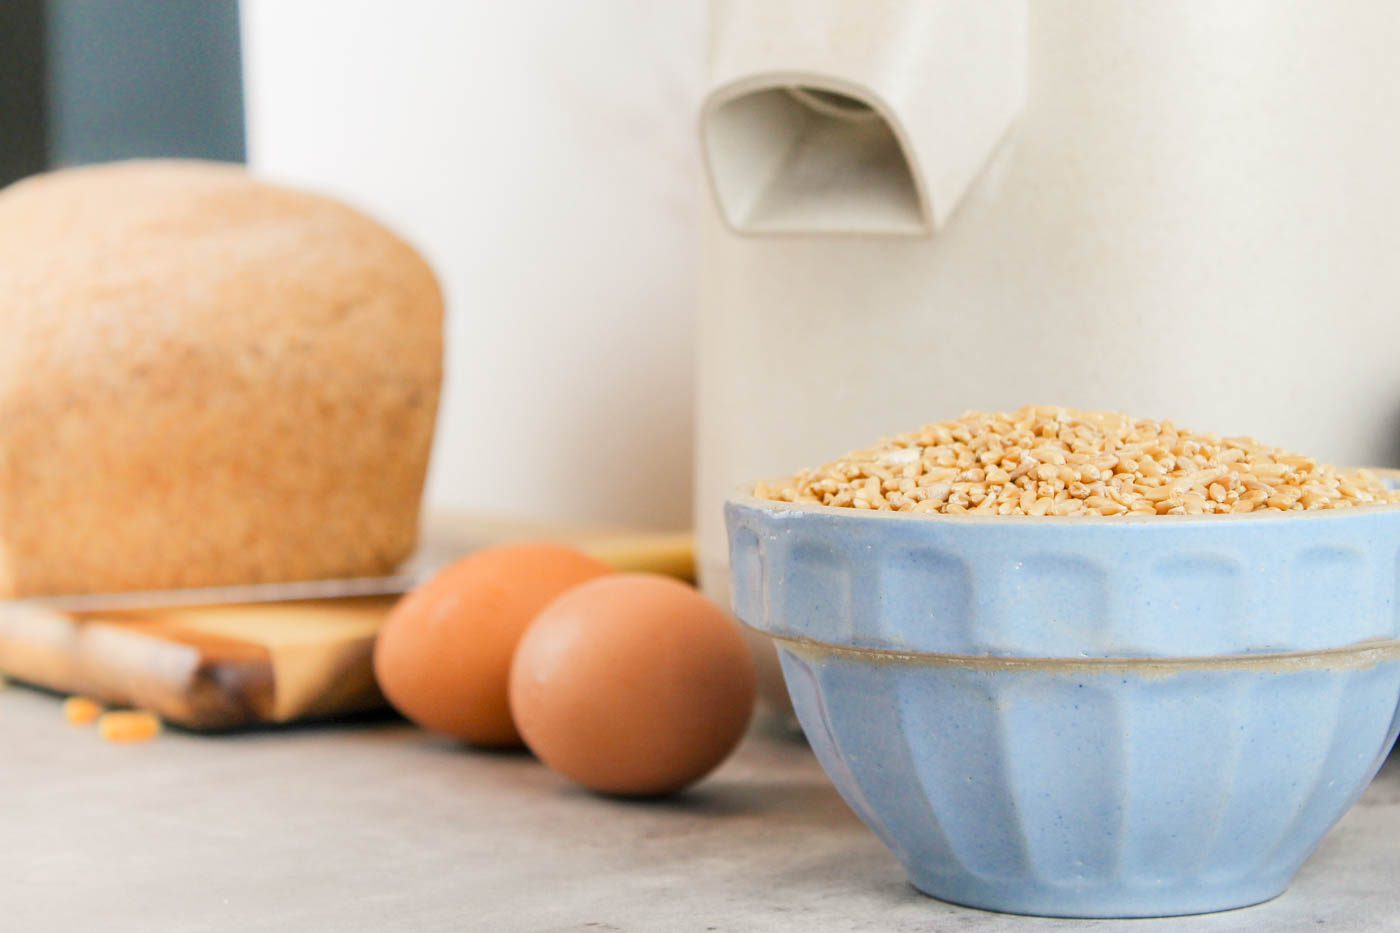 a bowl of wheat berries sitting in front of eggs and a mockmill grain mill